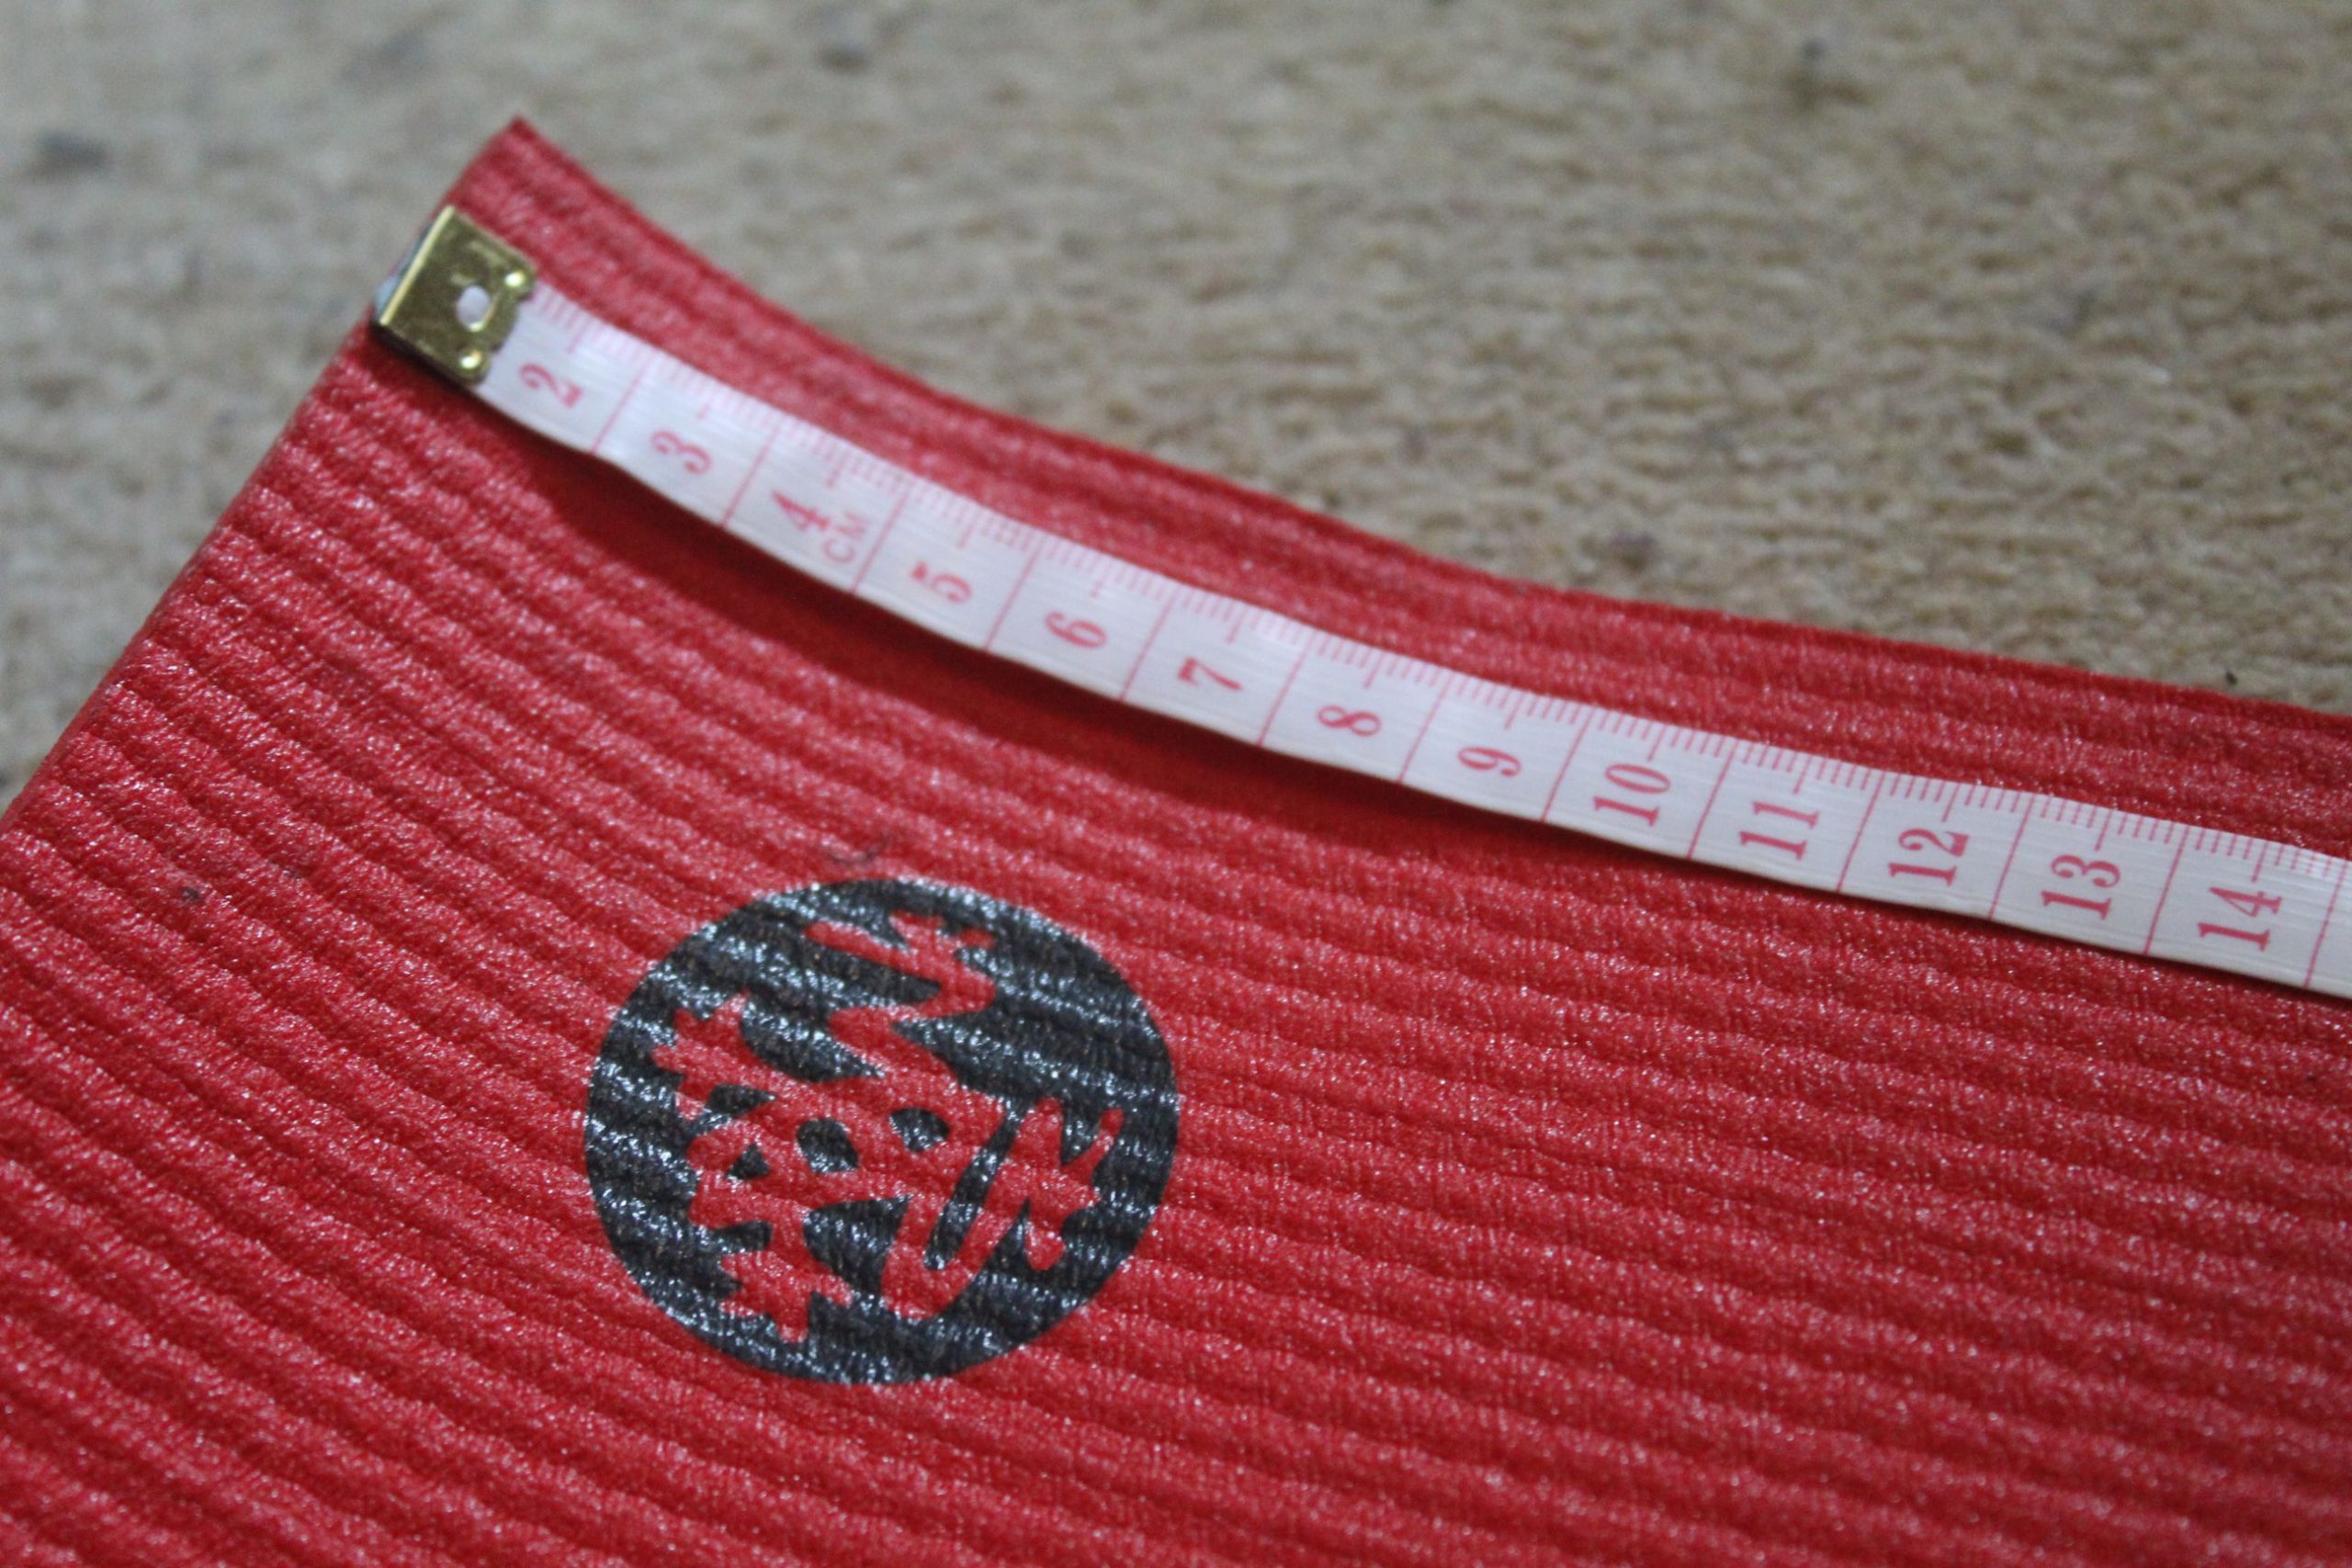 The top of a yoga mat with a measuring tape across it.